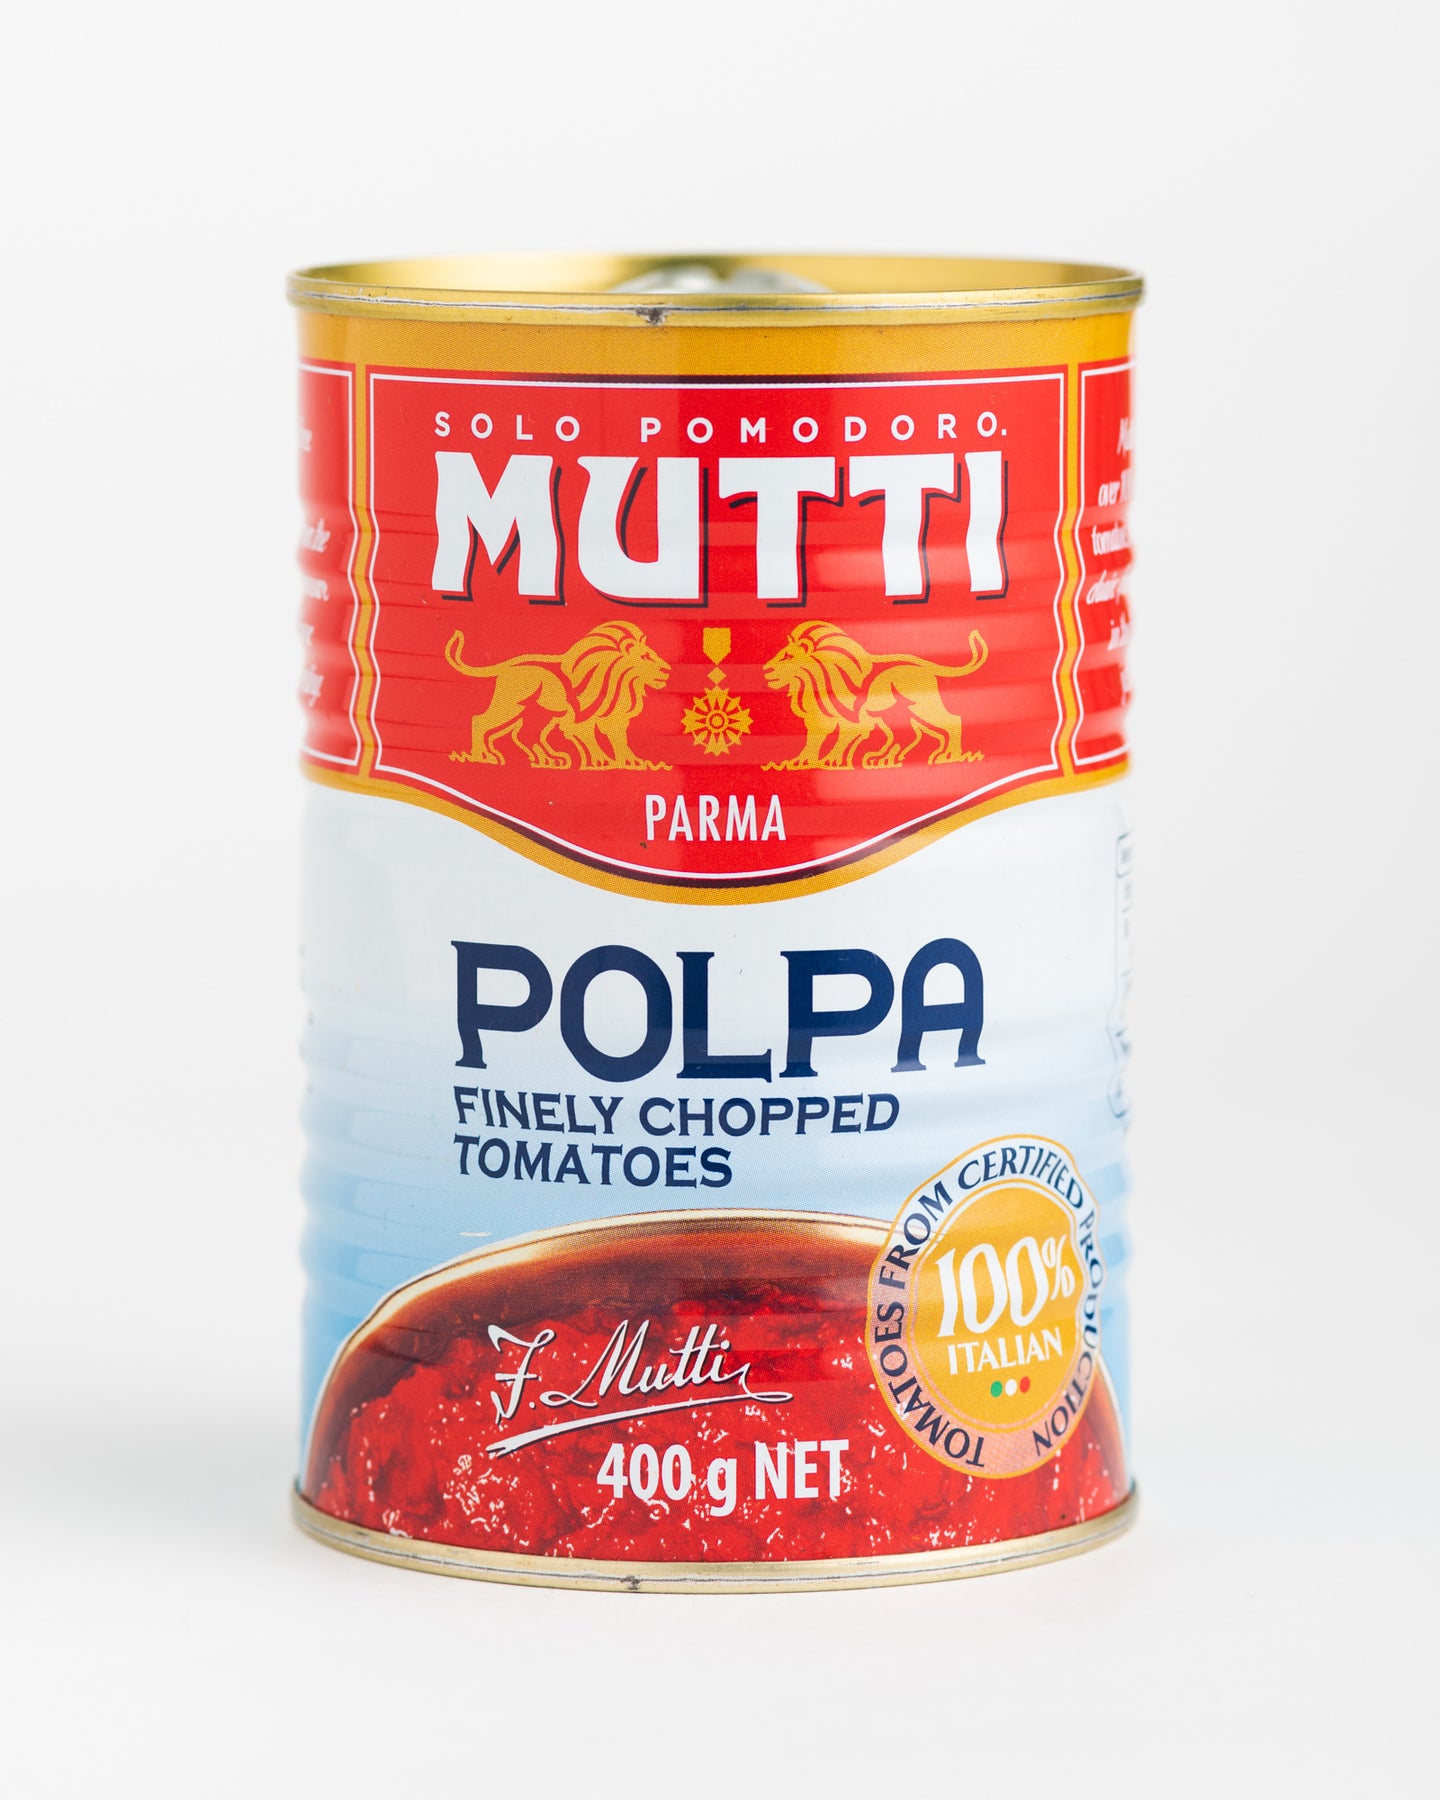 Mutti Pomodoro: only the best Italian tomatoes